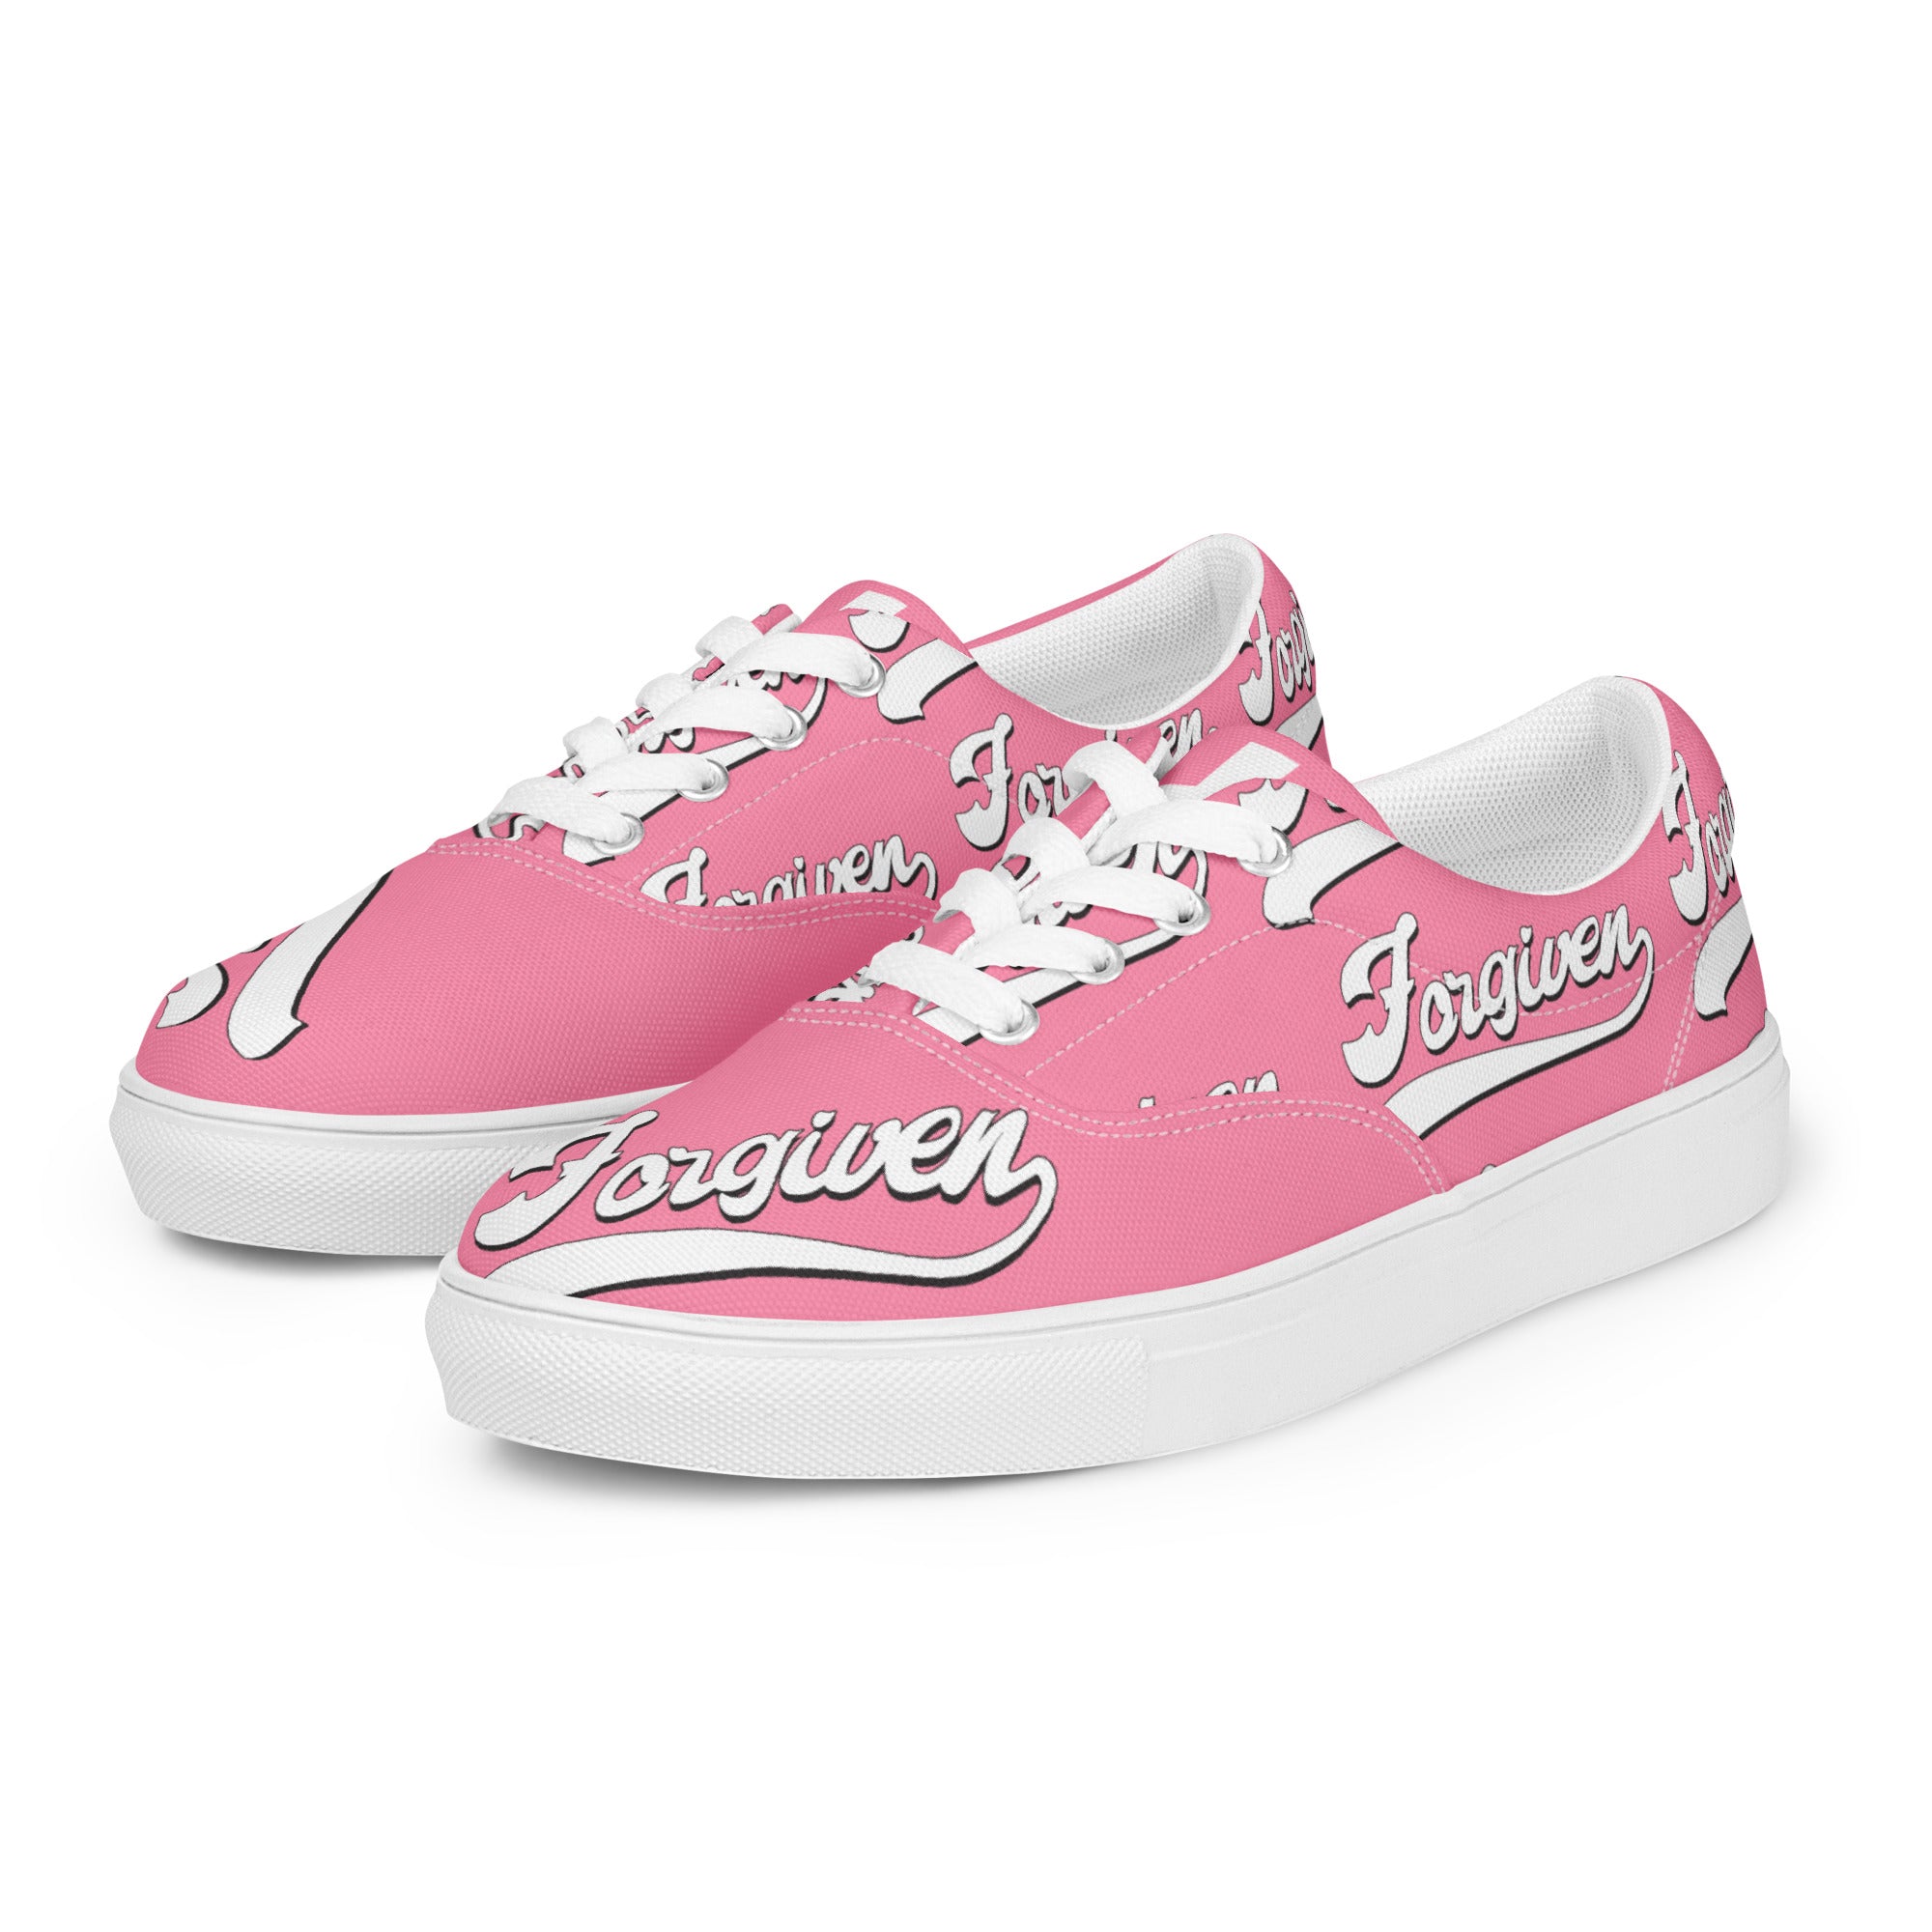 Women’s Forgiven Lace-Up Shoes (Pink)